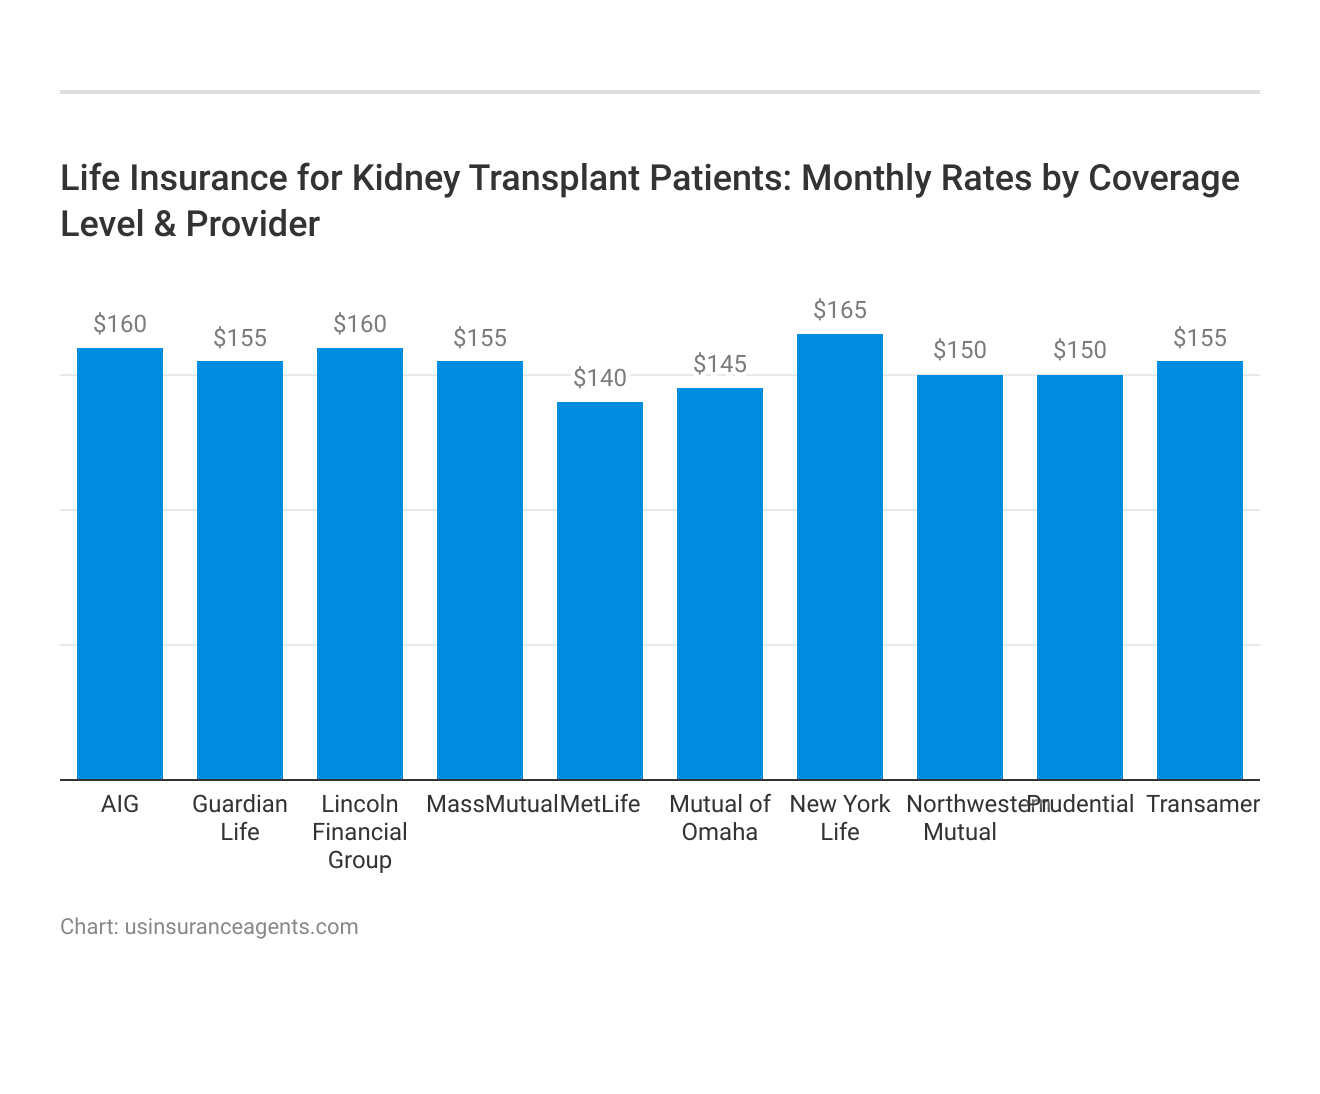 <h3>Life Insurance for Kidney Transplant Patients: Monthly Rates by Coverage Level & Provider</h3>